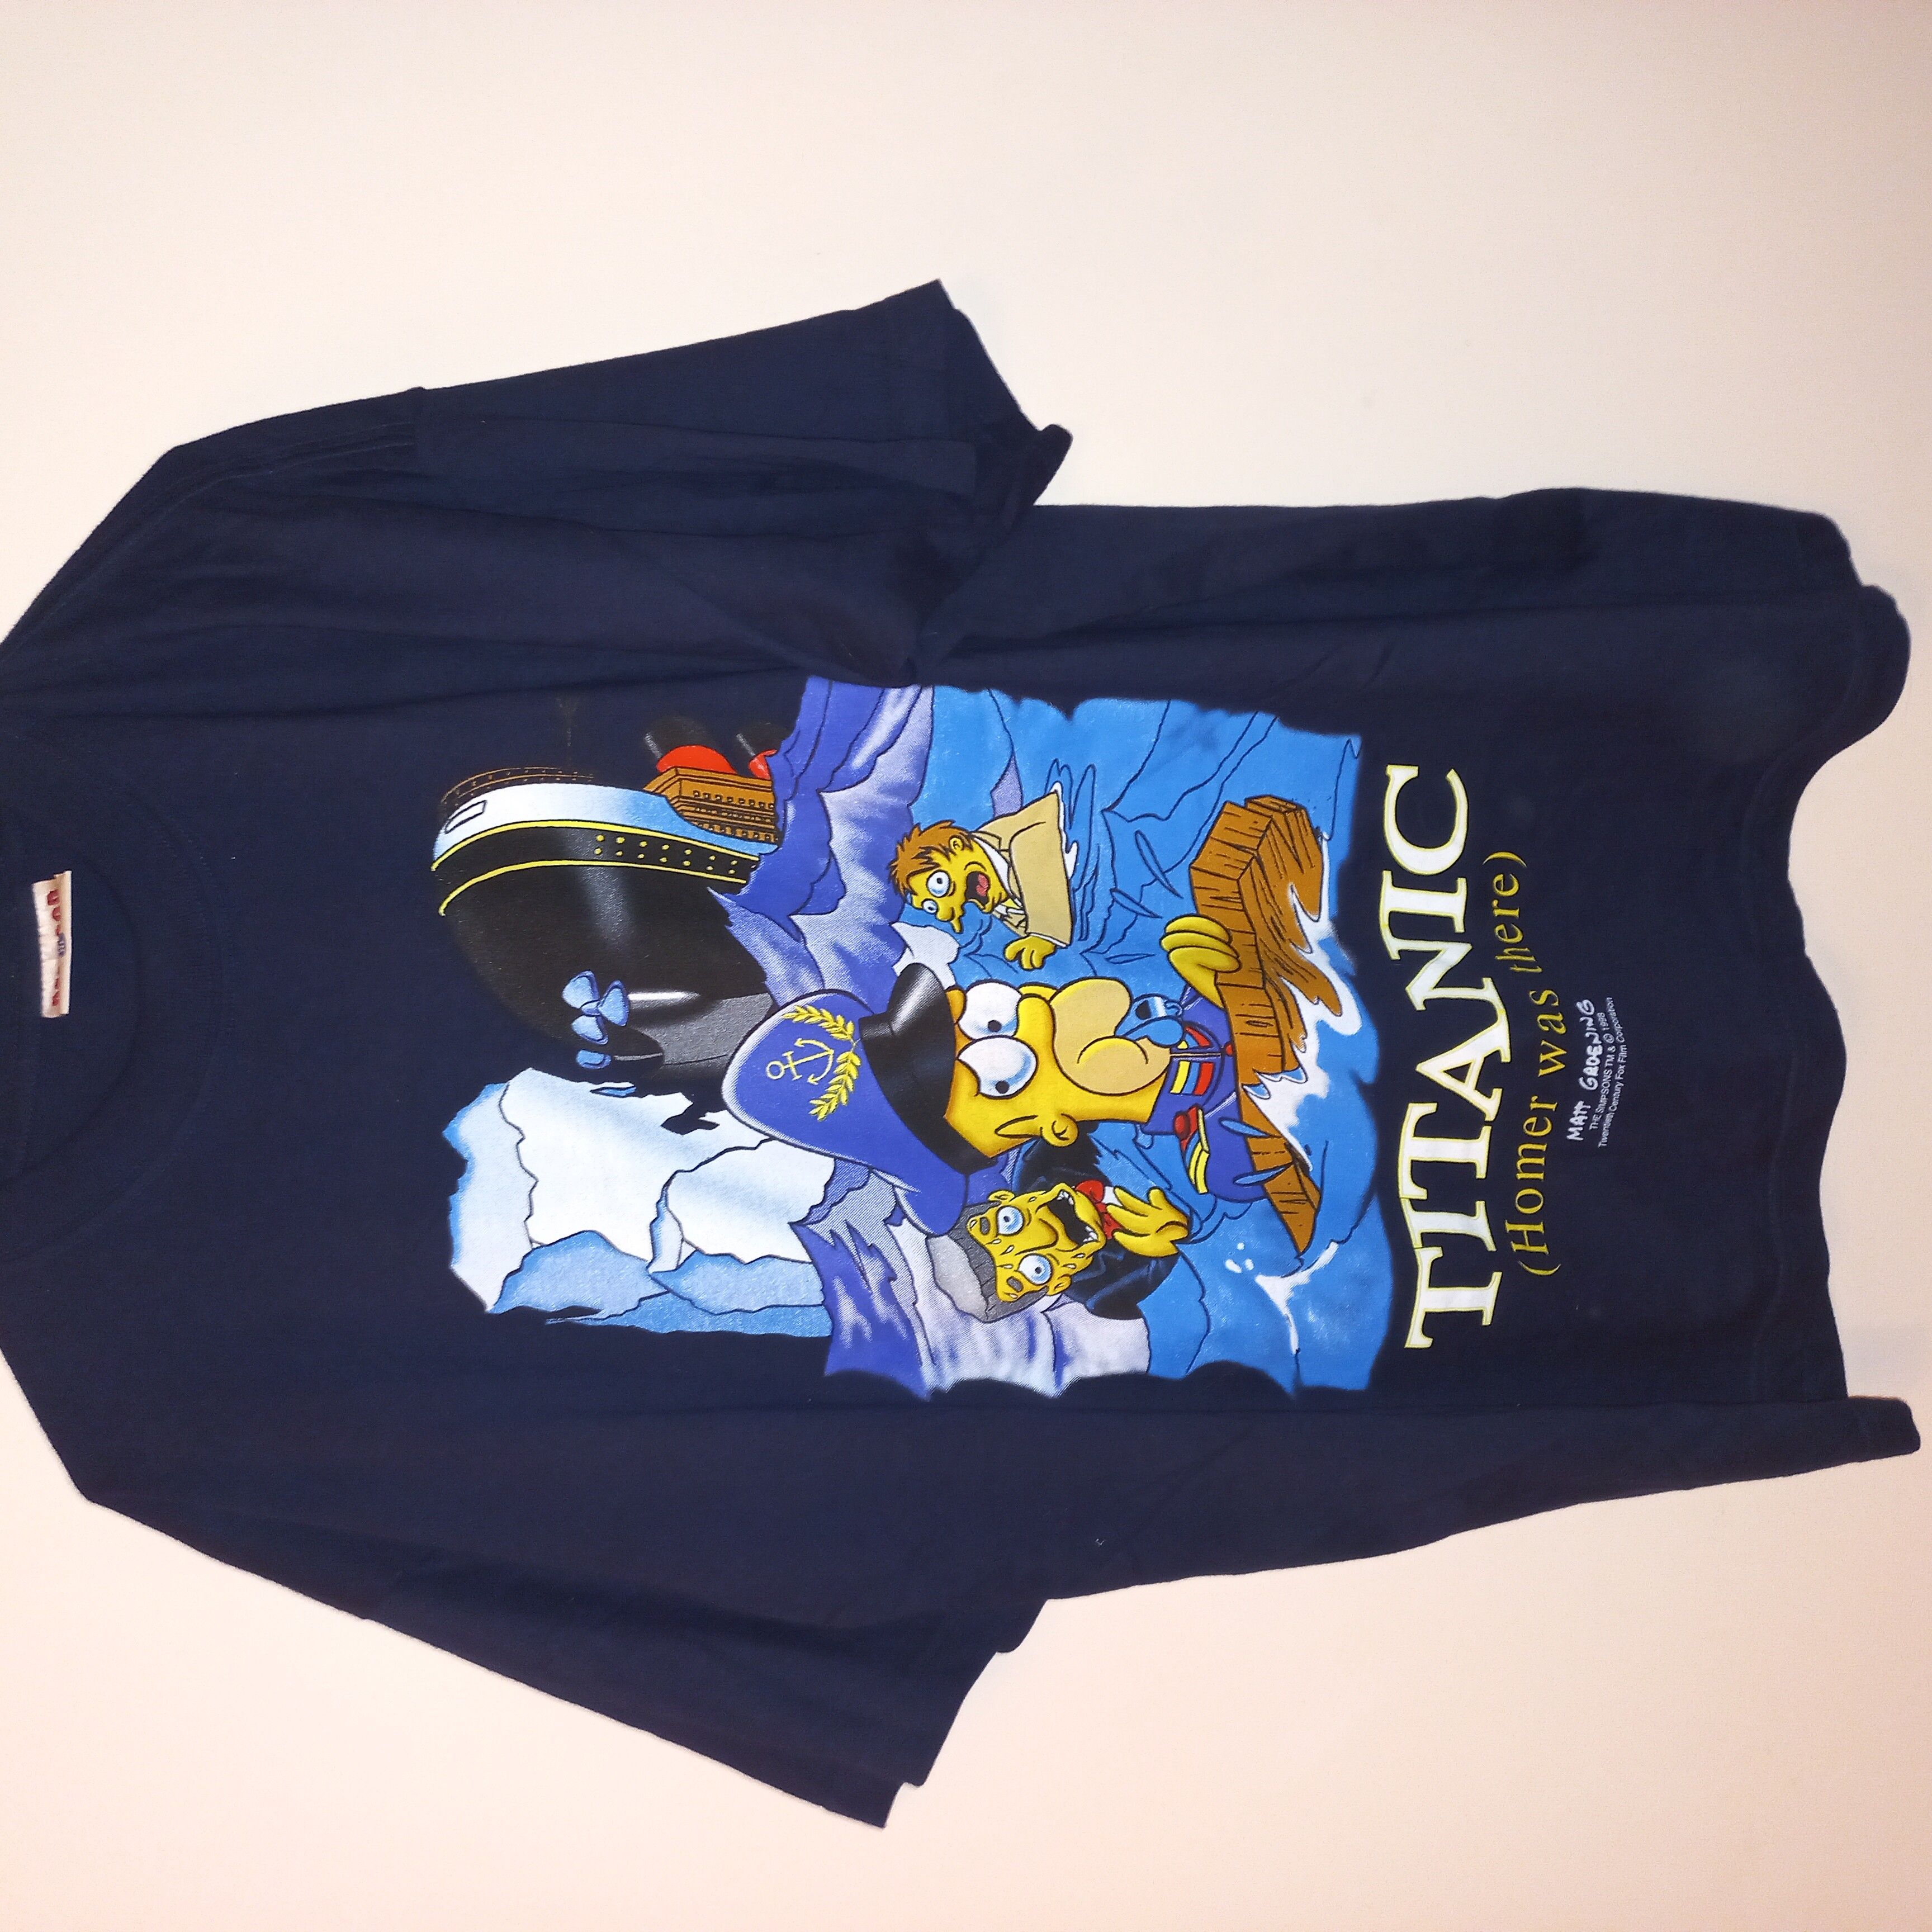 Rwd Redwood Vintage 1998 Titanic The Simpsons 'Homer Was There' Size US XL / EU 56 / 4 - 1 Preview